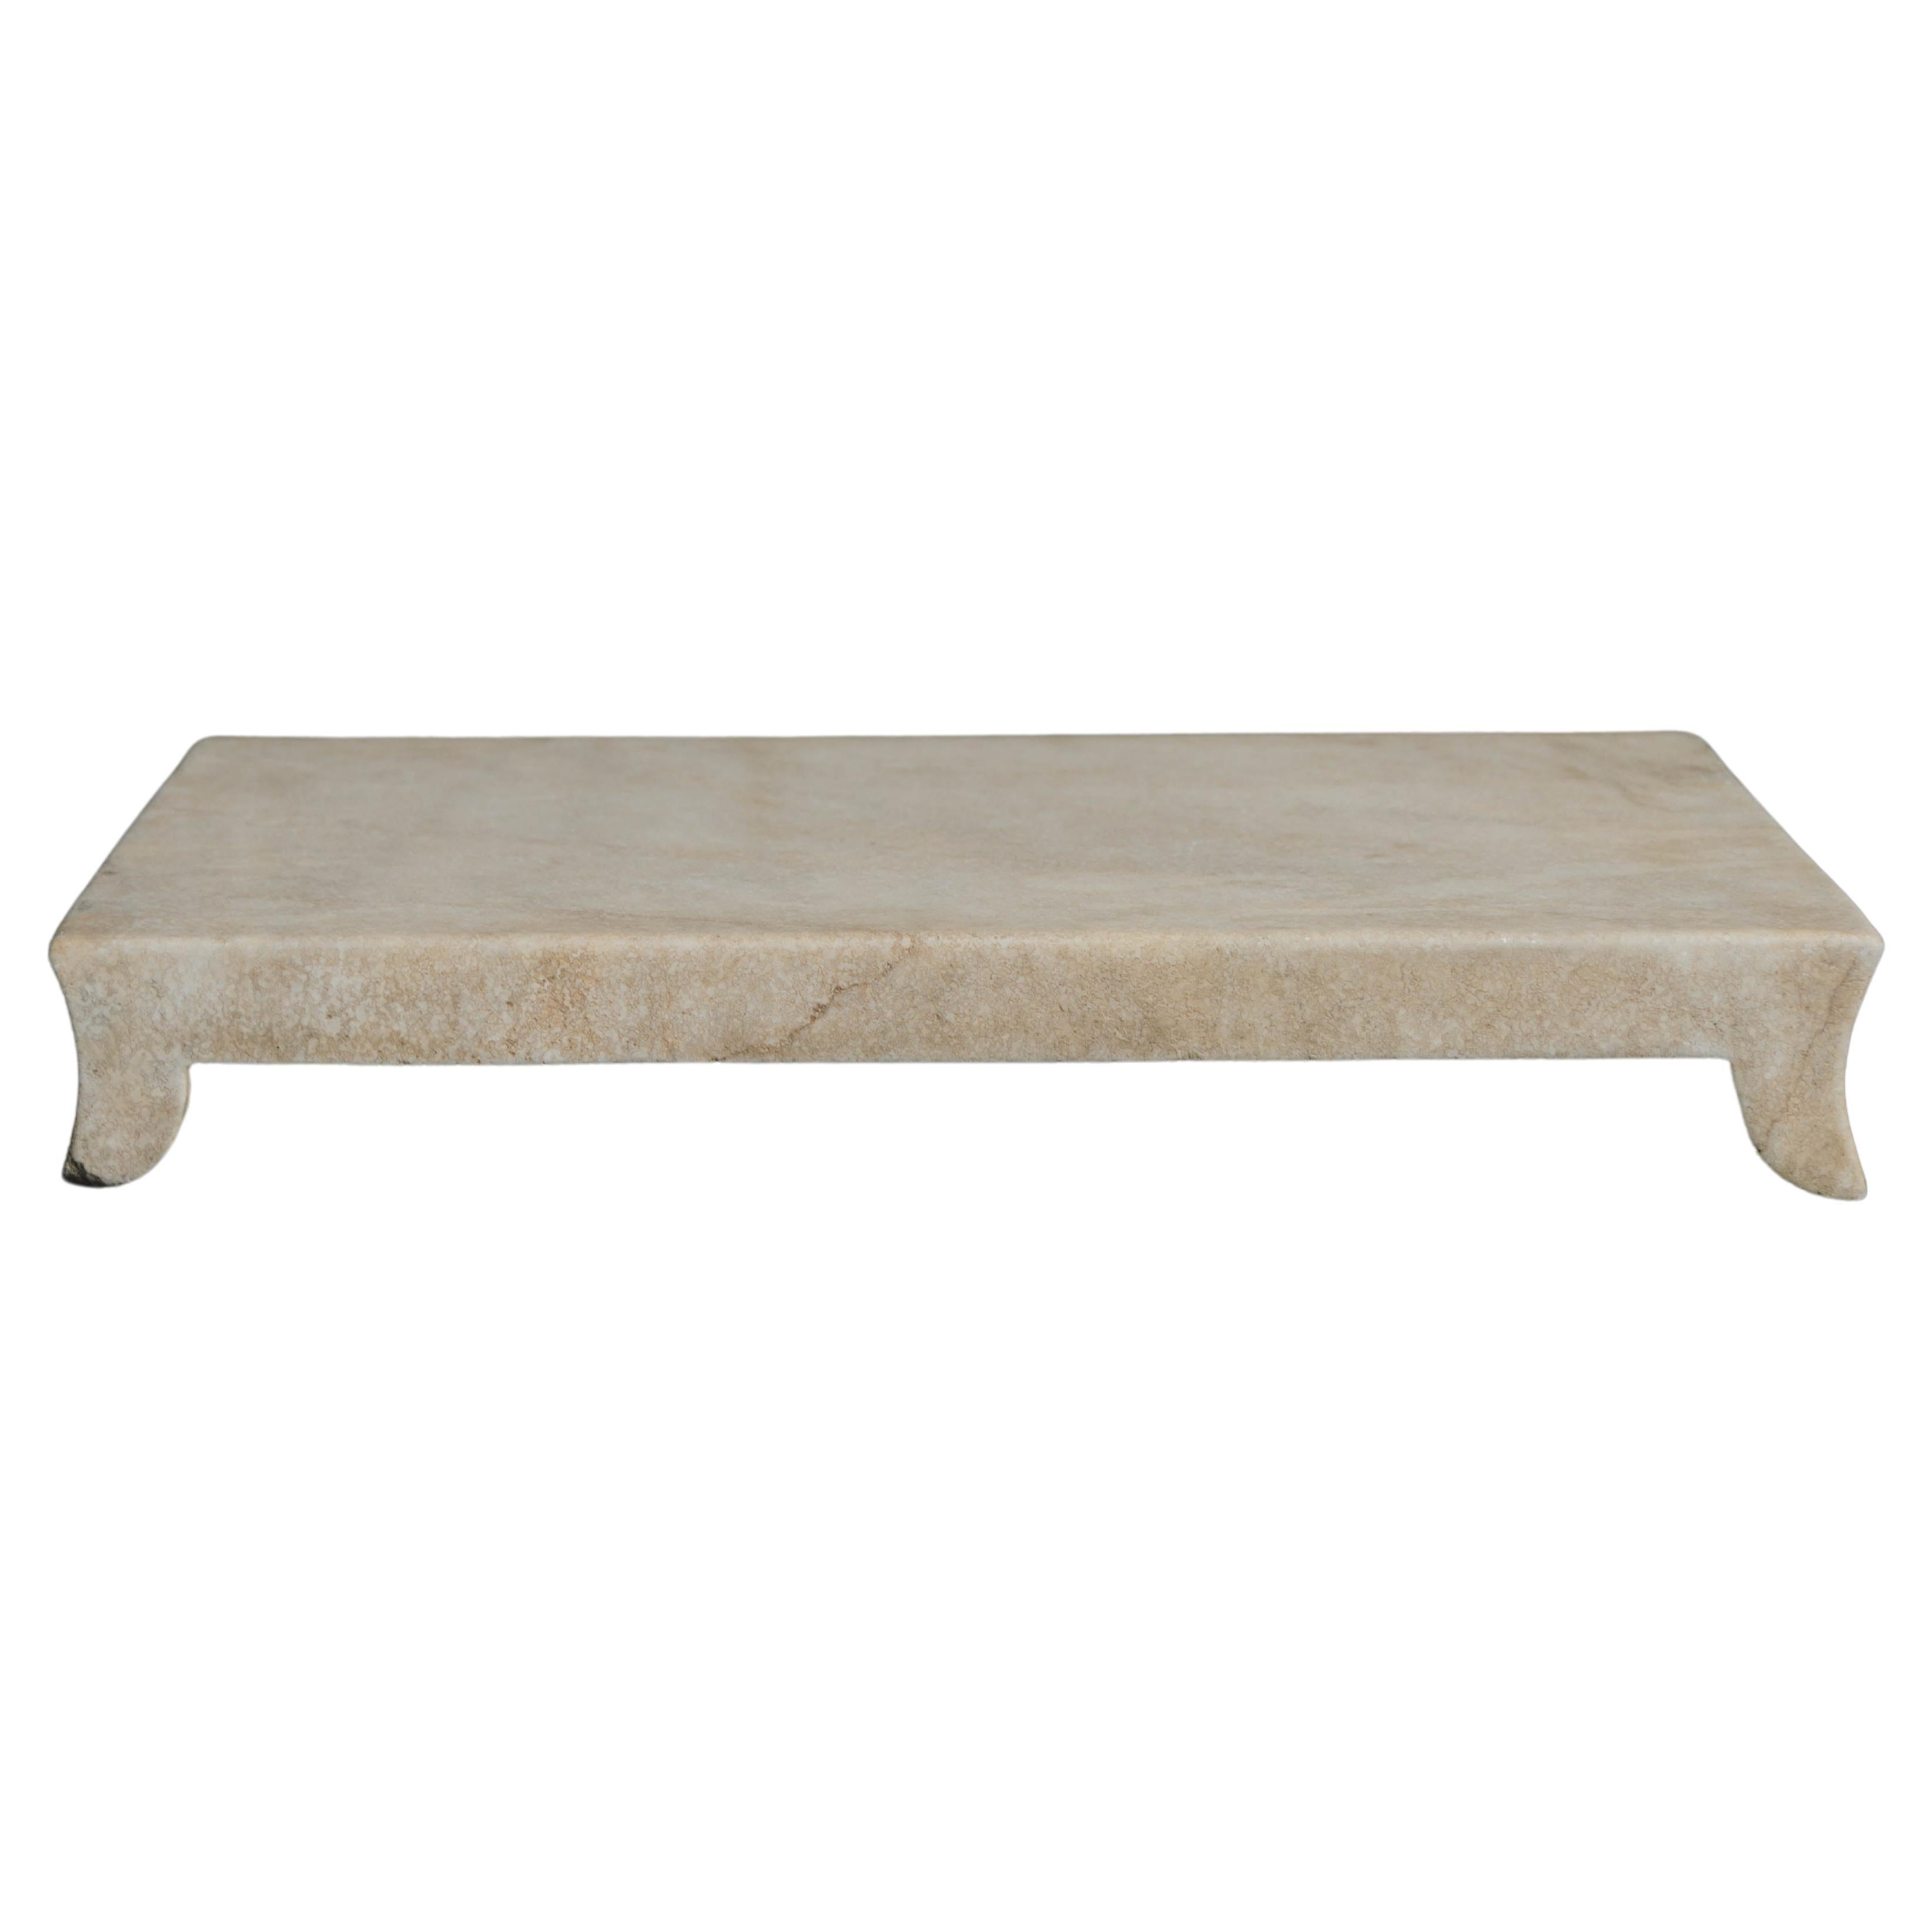 Han Bai Yu Stone Elevated Tray by Robert Kuo, Hand Carved, Limited Edition For Sale